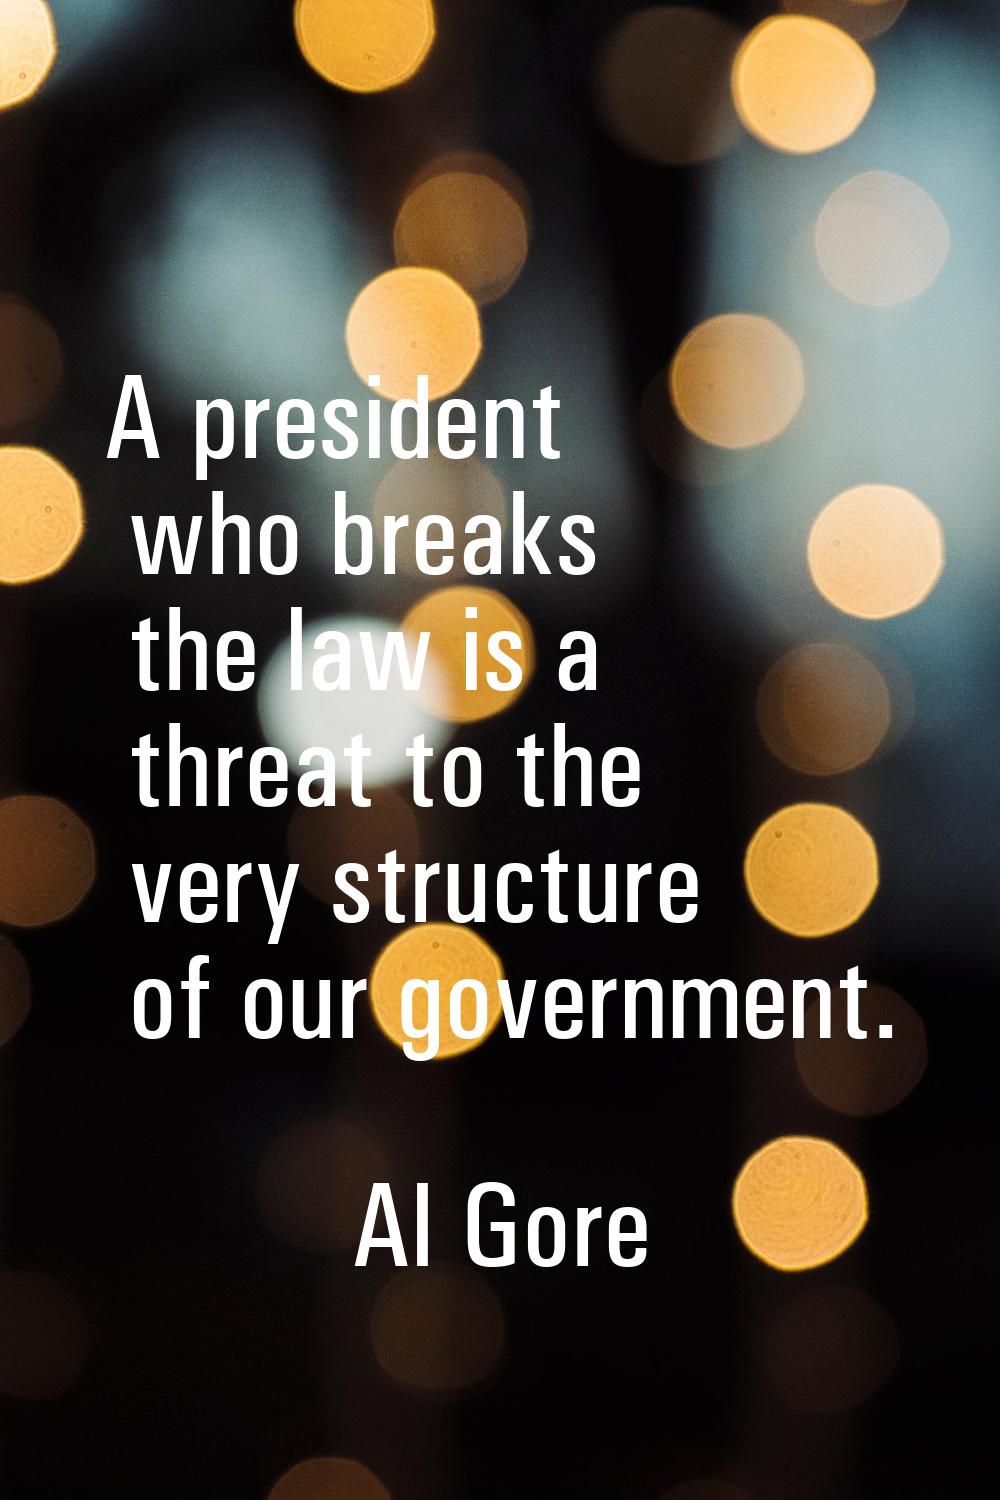 A president who breaks the law is a threat to the very structure of our government.